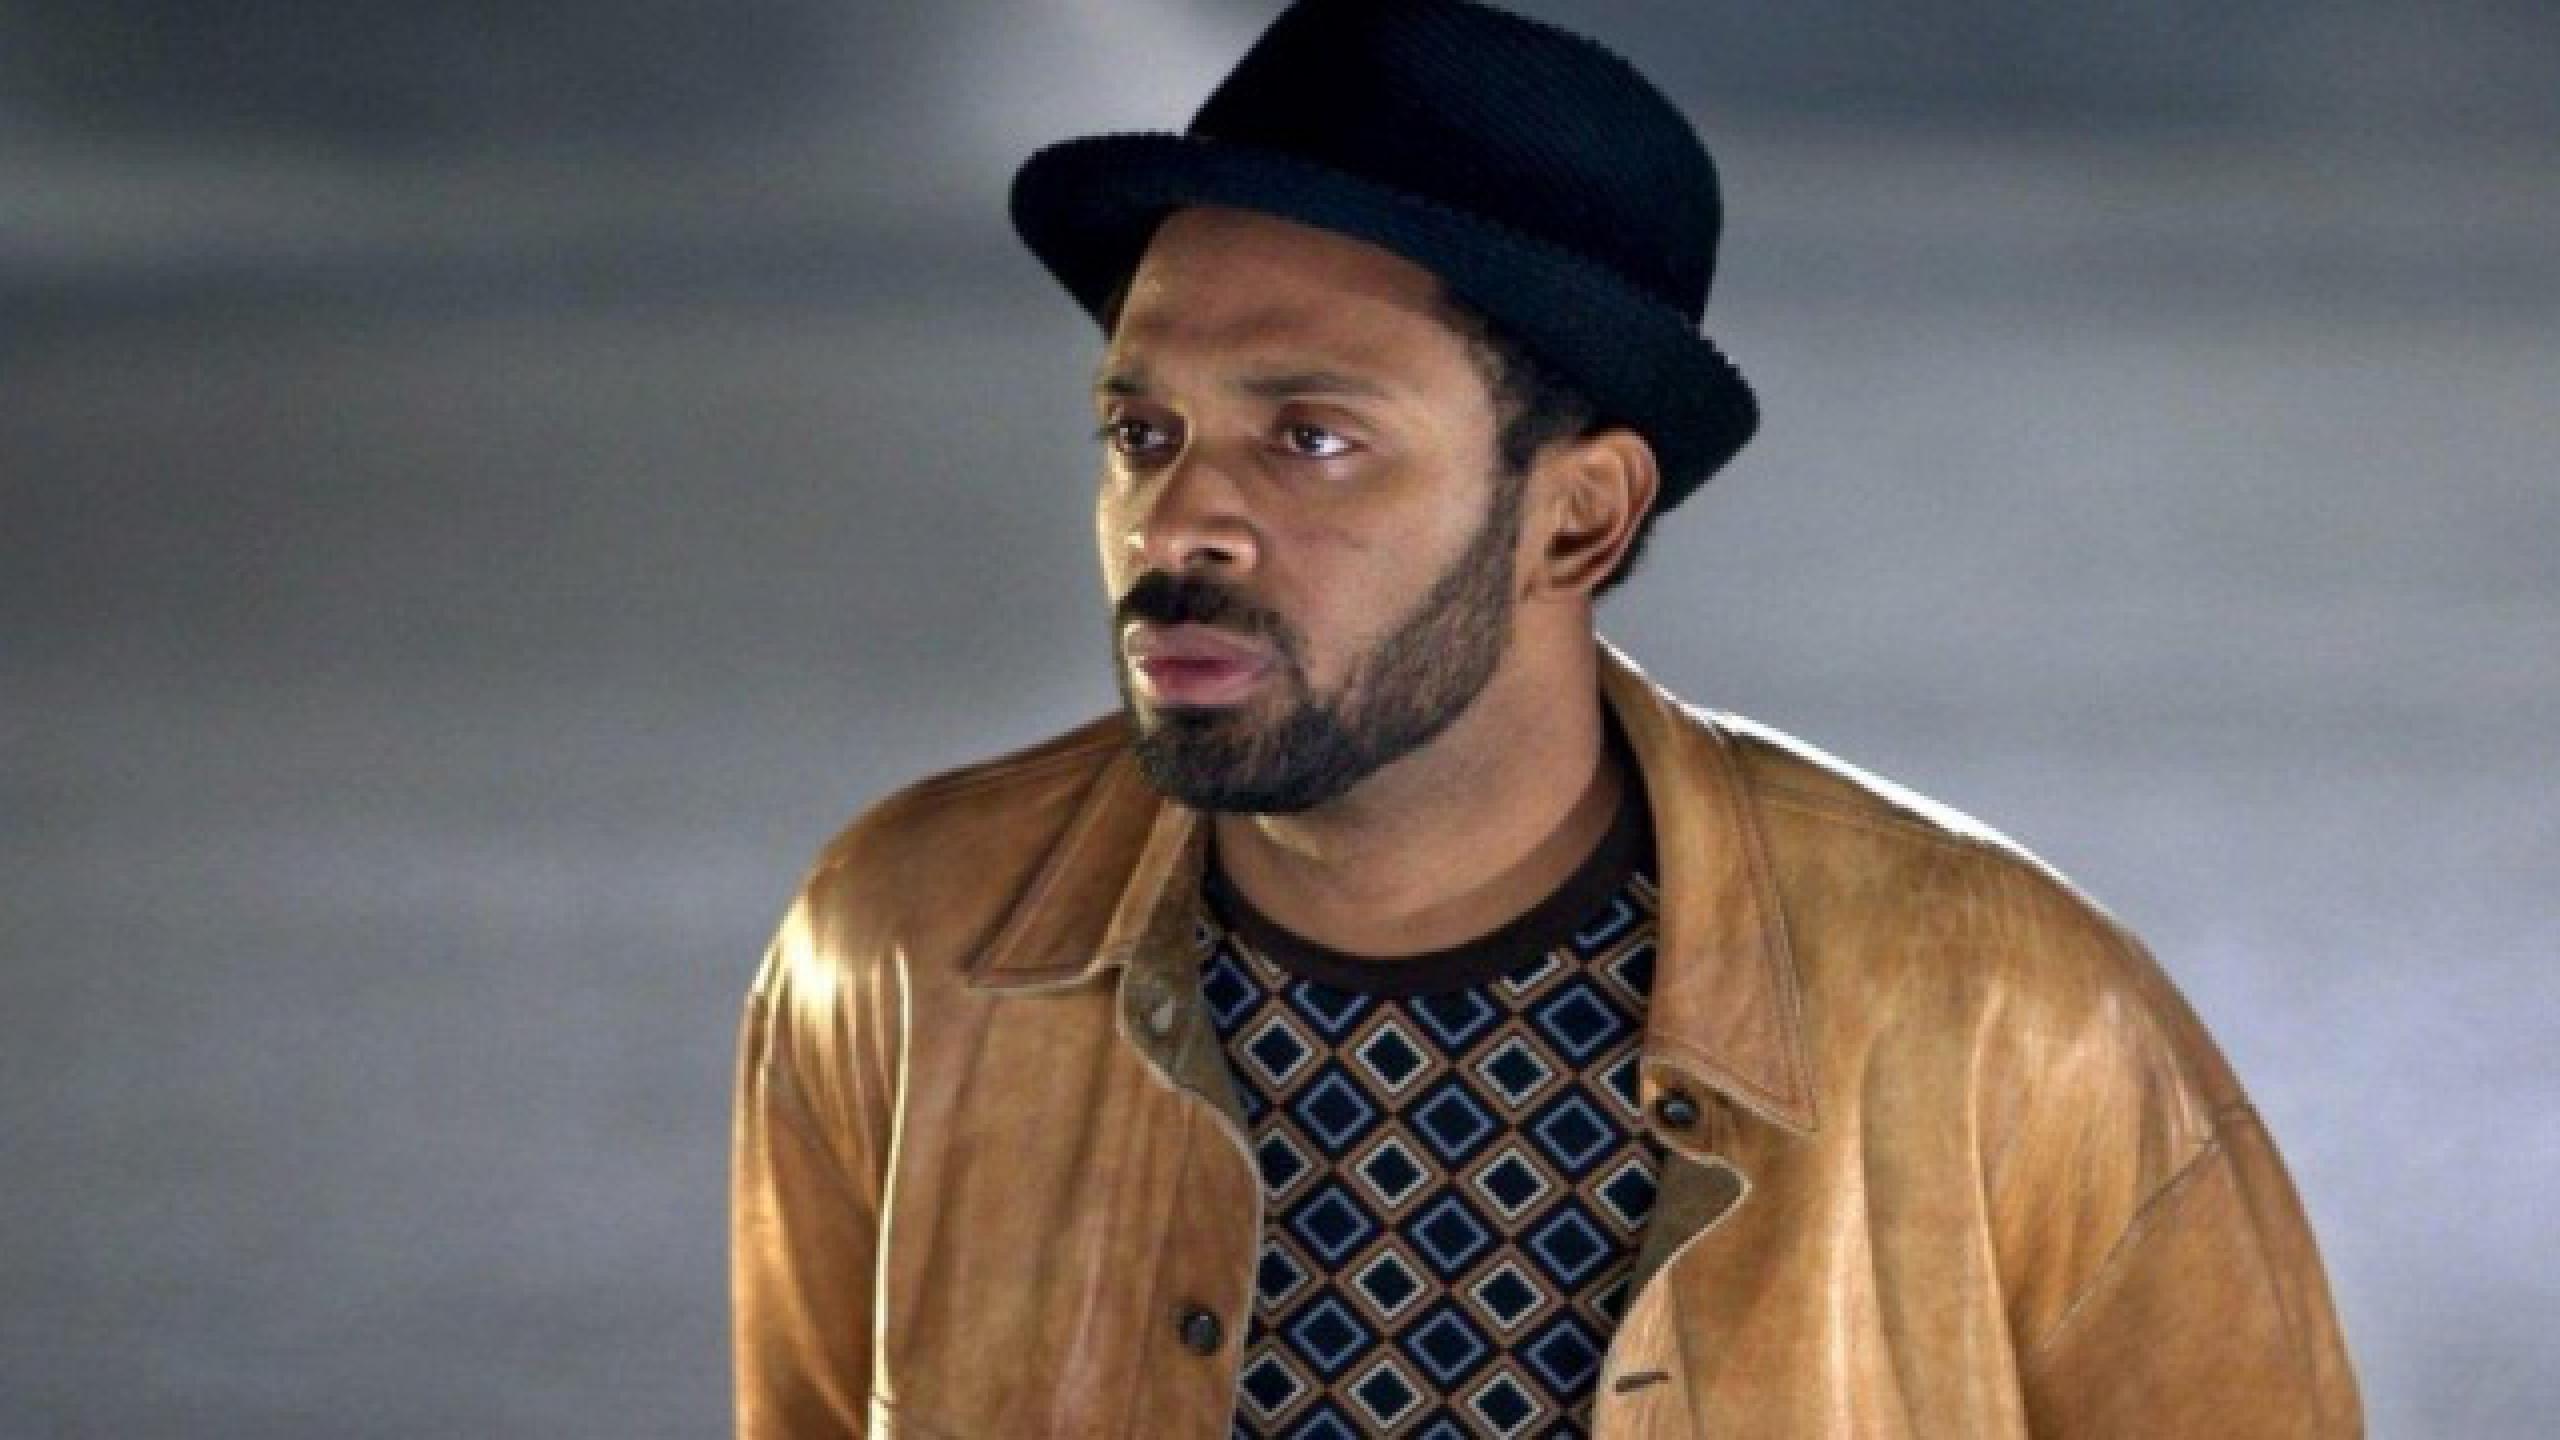 Mike Epps 1492559239.1.2560x1440 